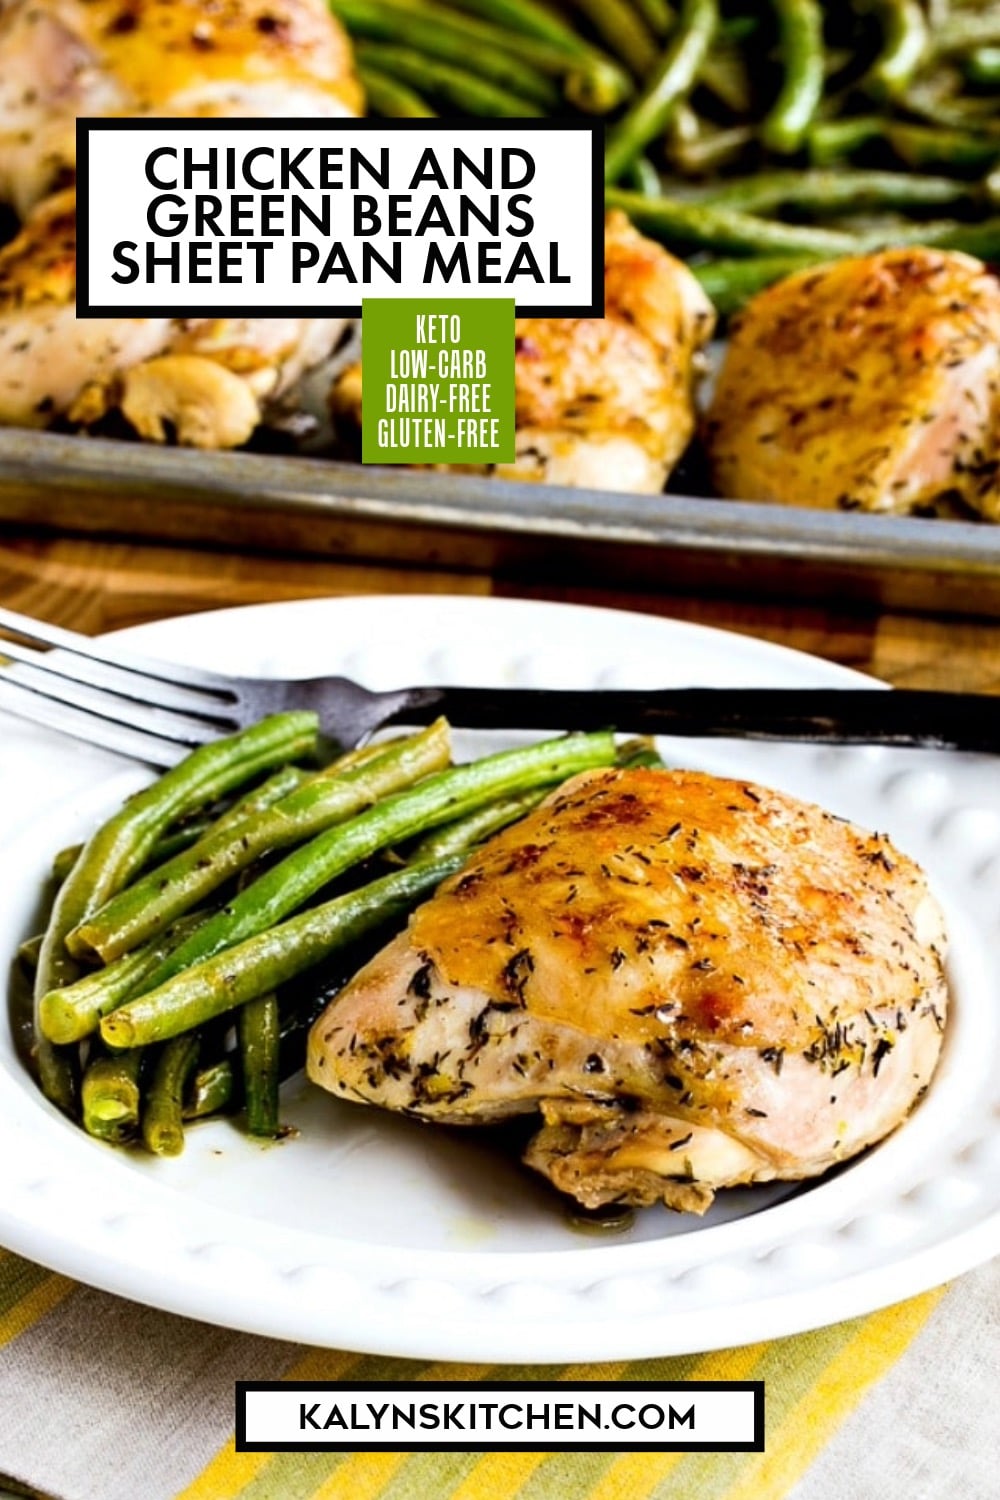 Pinterest image of Chicken and Green Beans Sheet Pan Meal